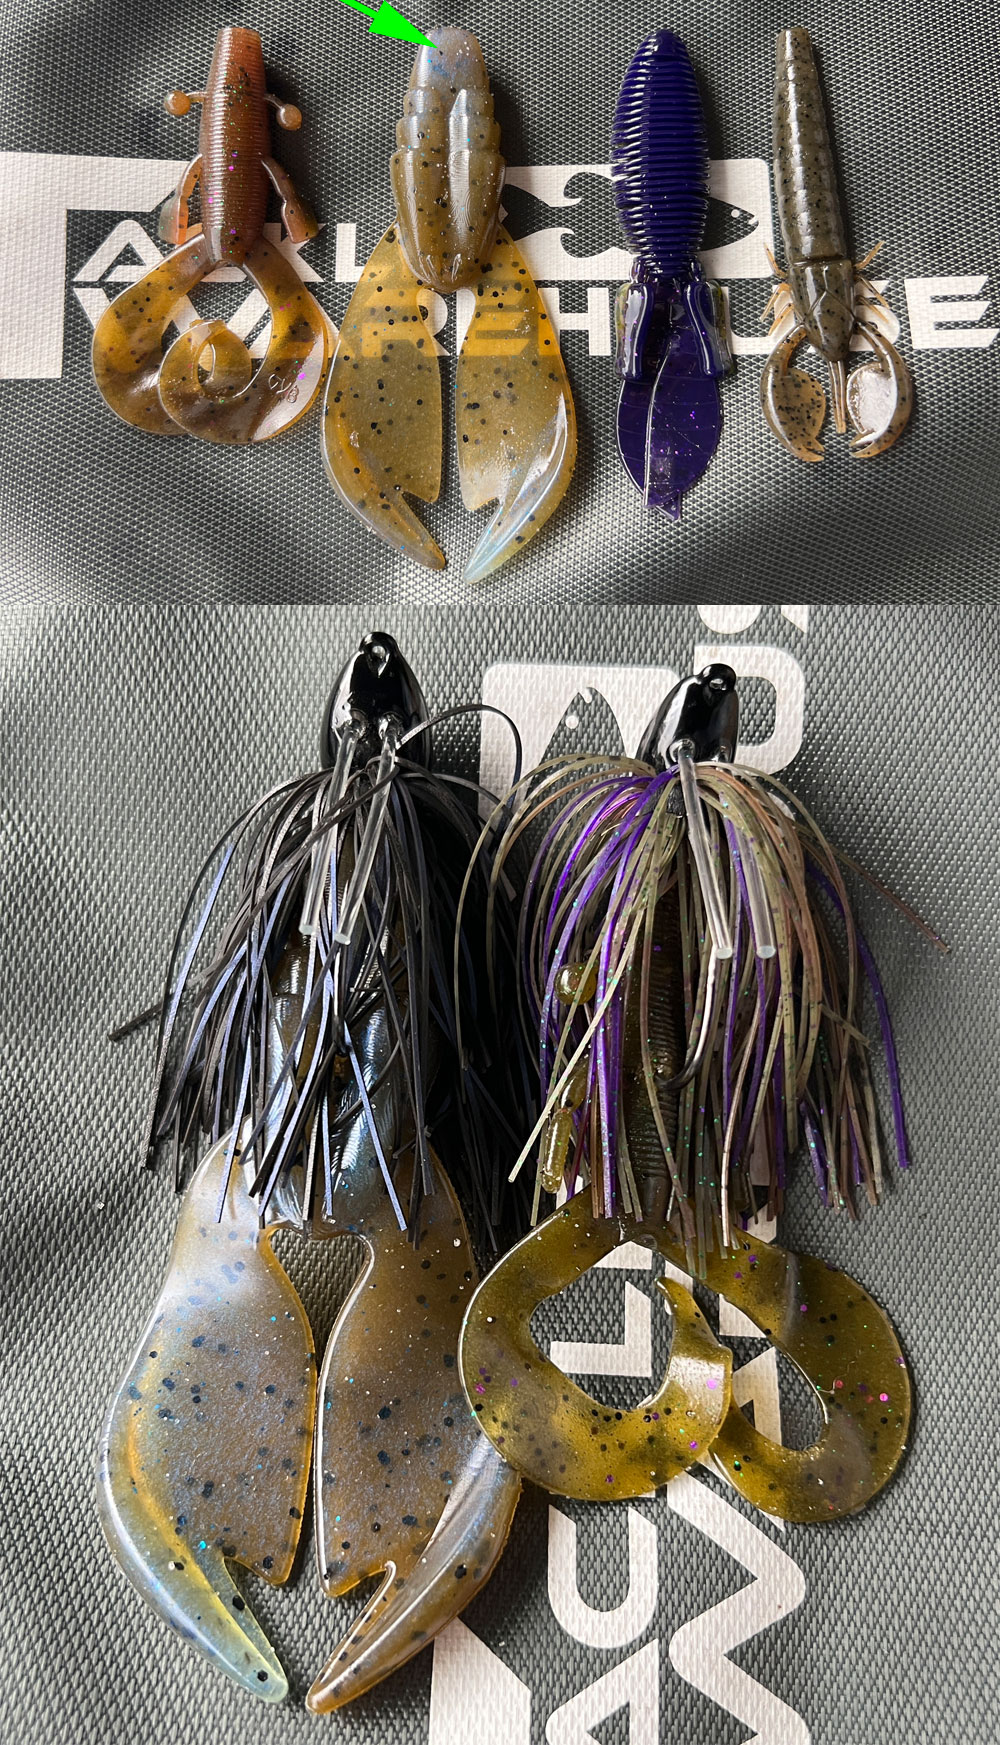 2 PACKAGES - LUCK-E-STRIKE 3 PRE-RIGGED DARTING SHAD - 2 COLORS